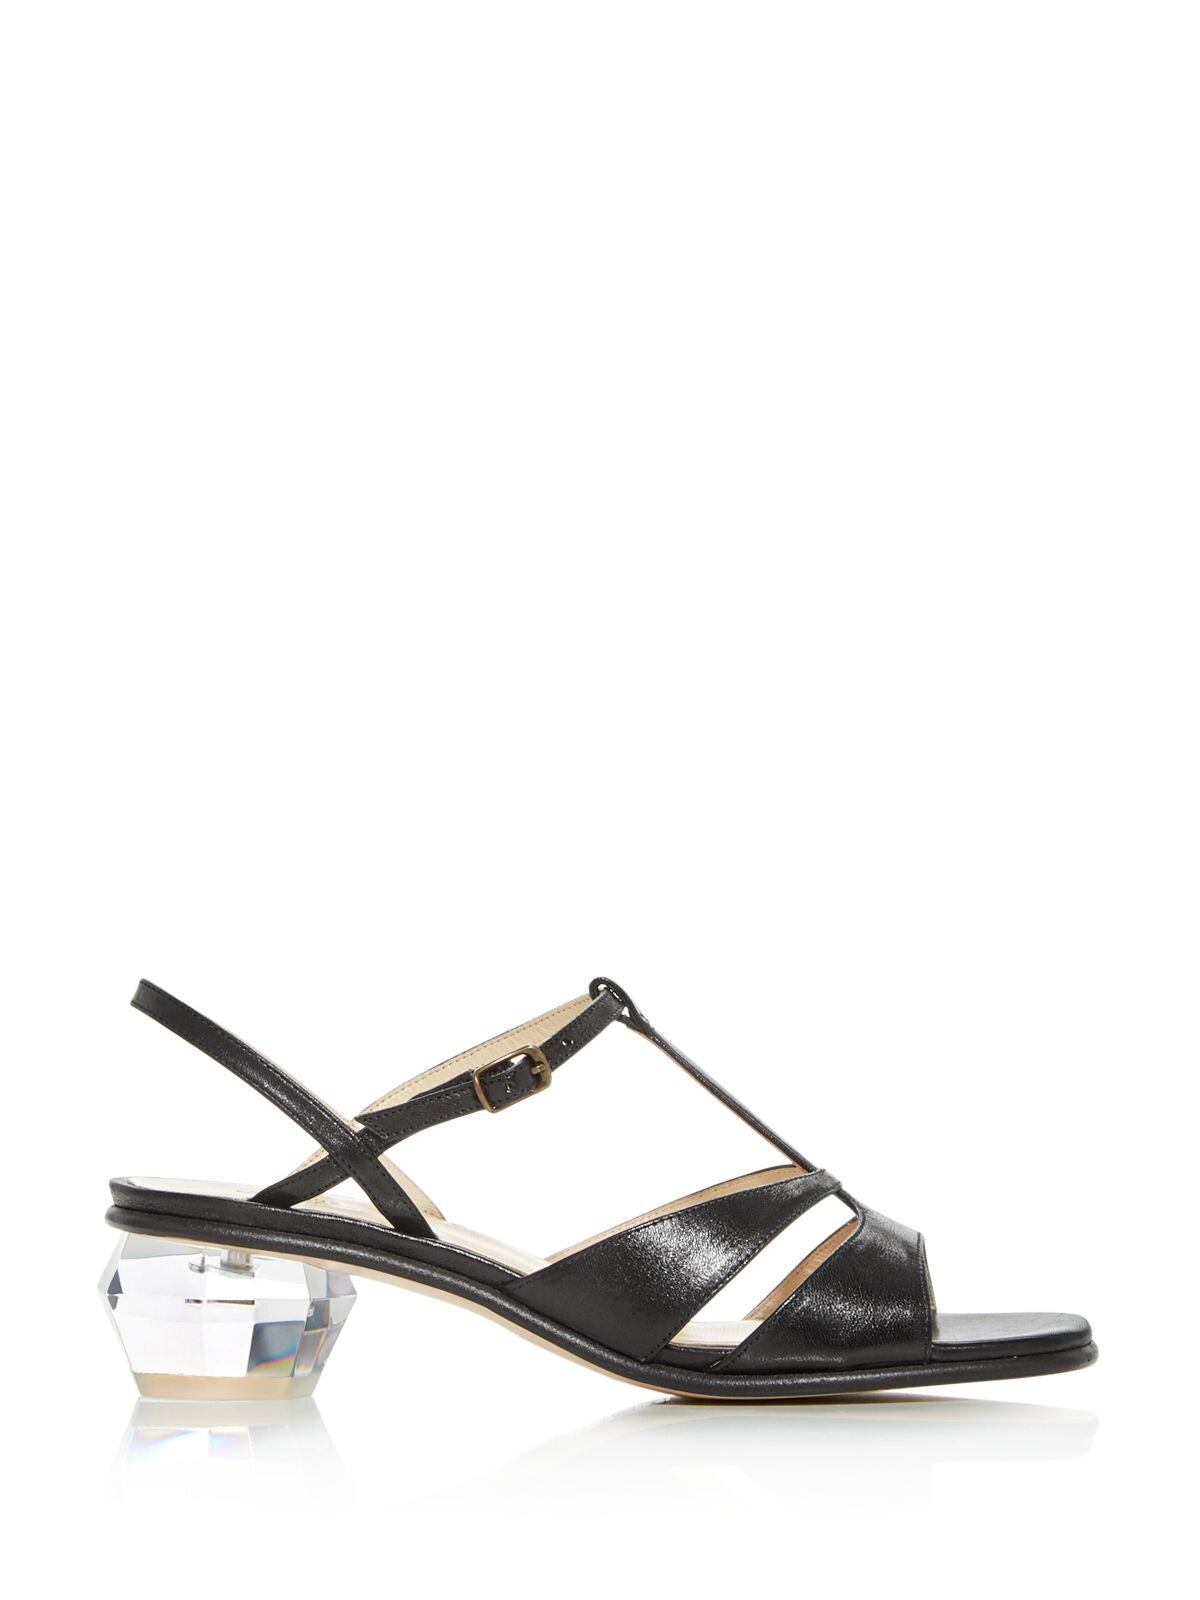 MARC JACOBS Womens Black T-Strap Strappy The Gem Square Toe Sculpted Heel Buckle Leather Slingback Sandal 37.5